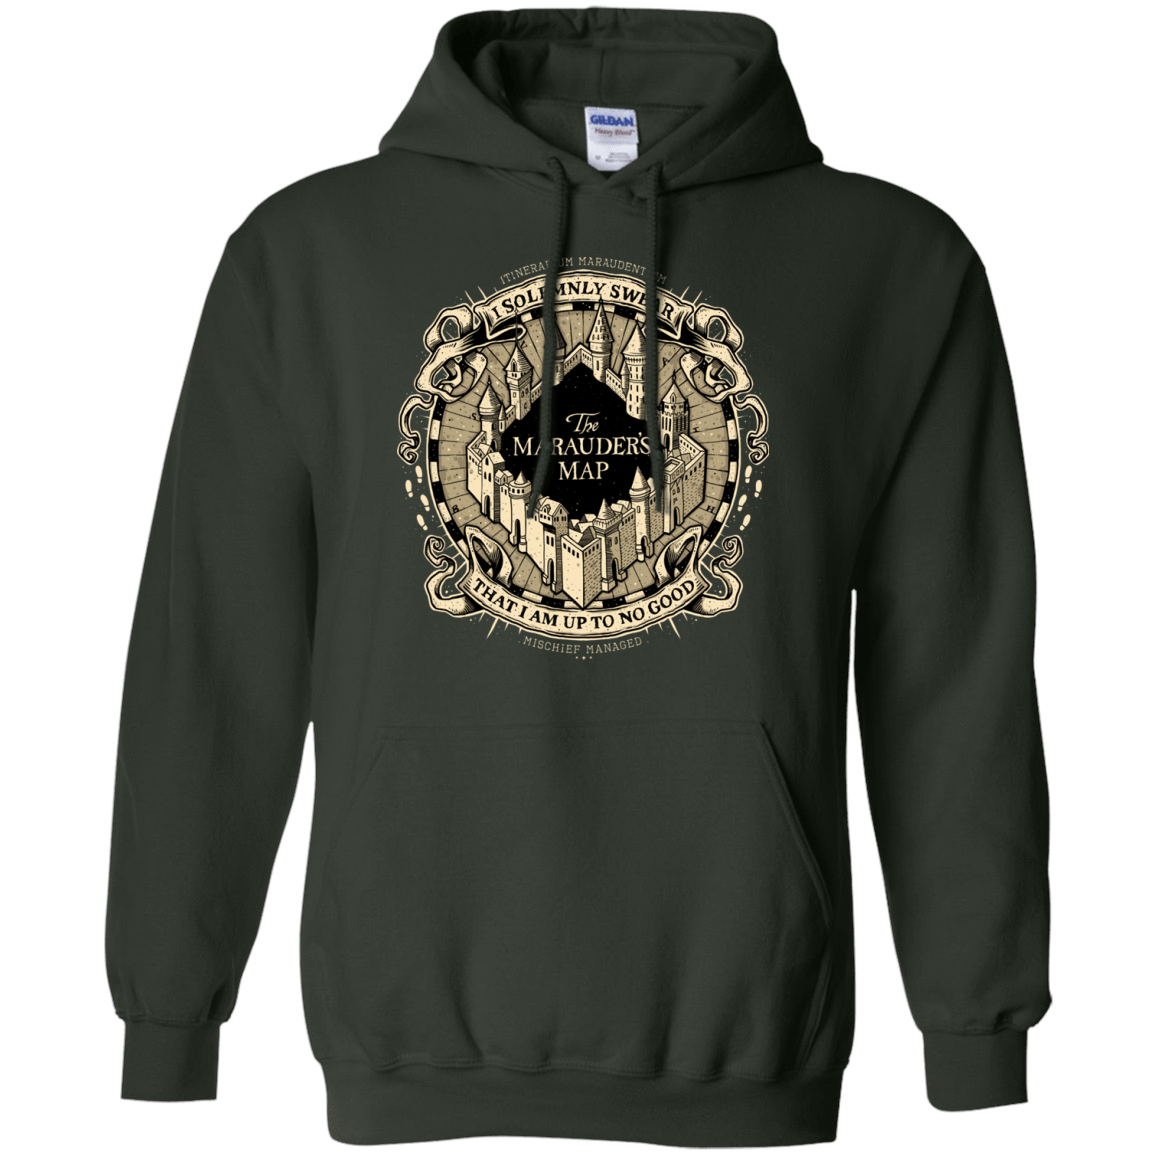 Sweatshirts Forest Green / Small I Solemnly Swear Pullover Hoodie